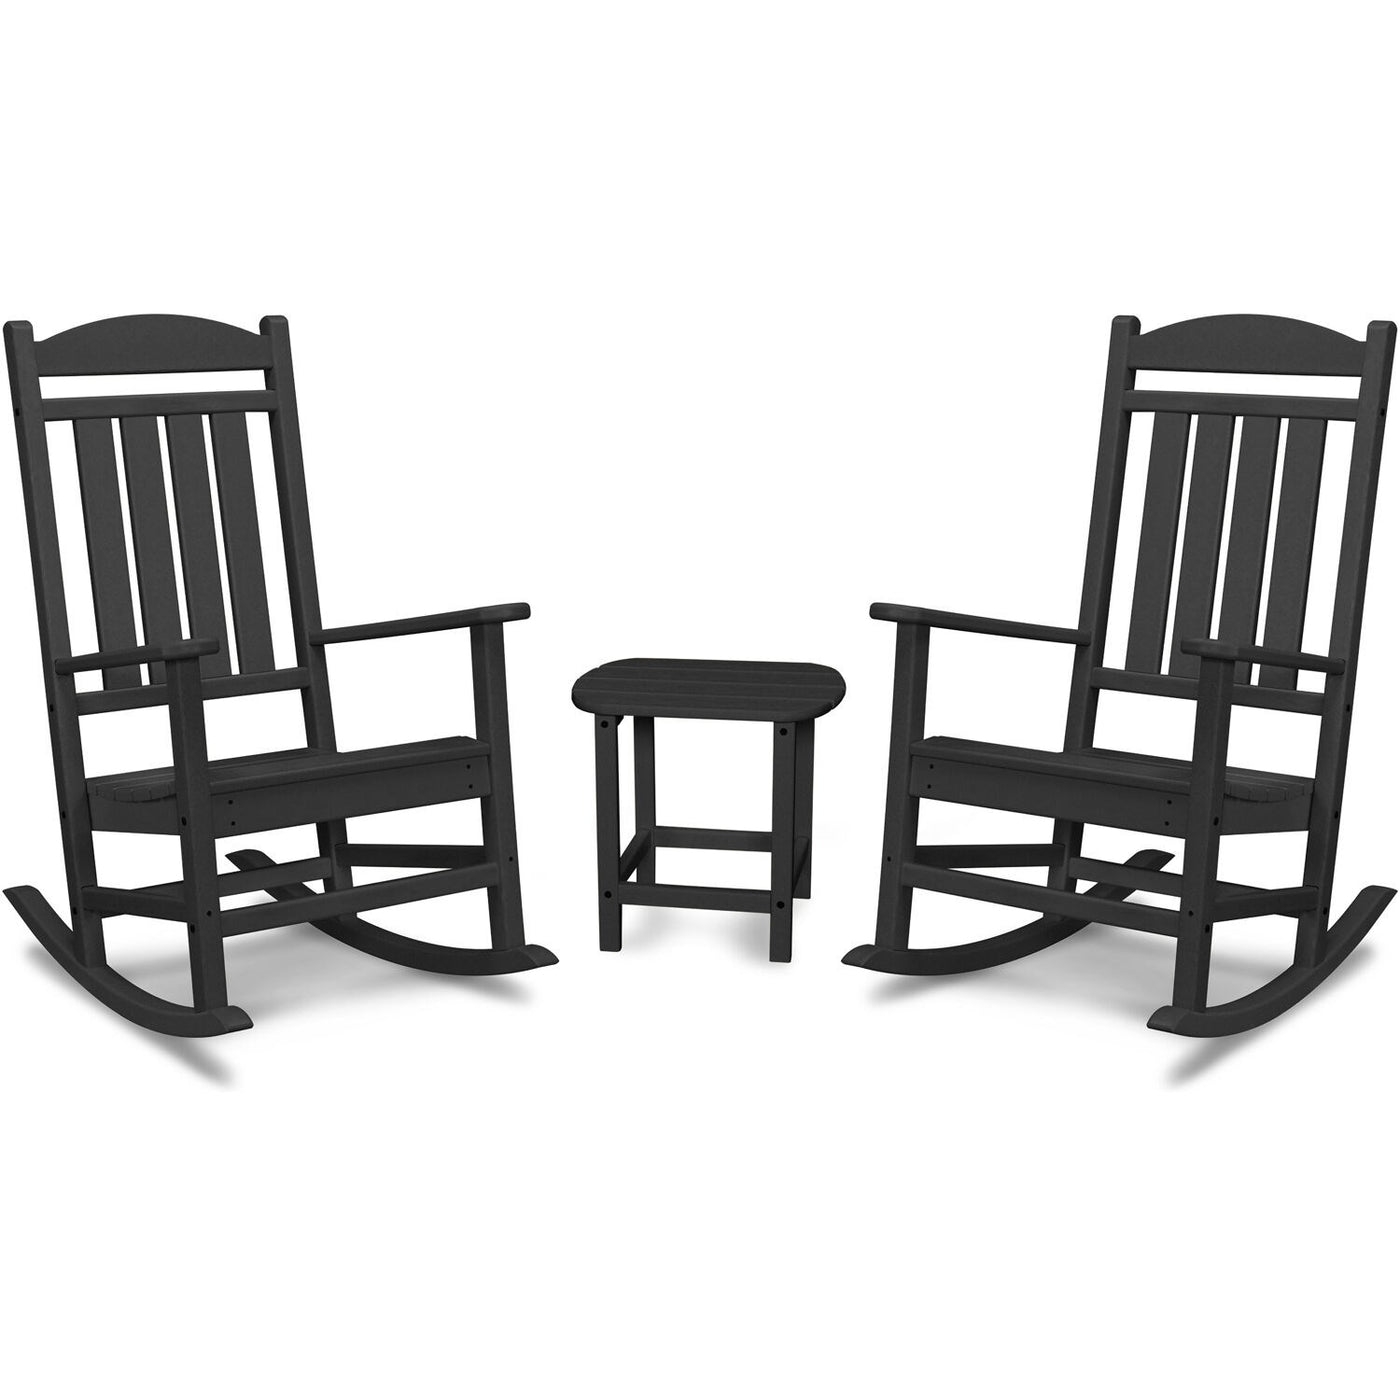 Hanover All-Weather Porch Rocker Set: 2 Porch Rockers and Side Table - Black - GreenLivingSupply-Store